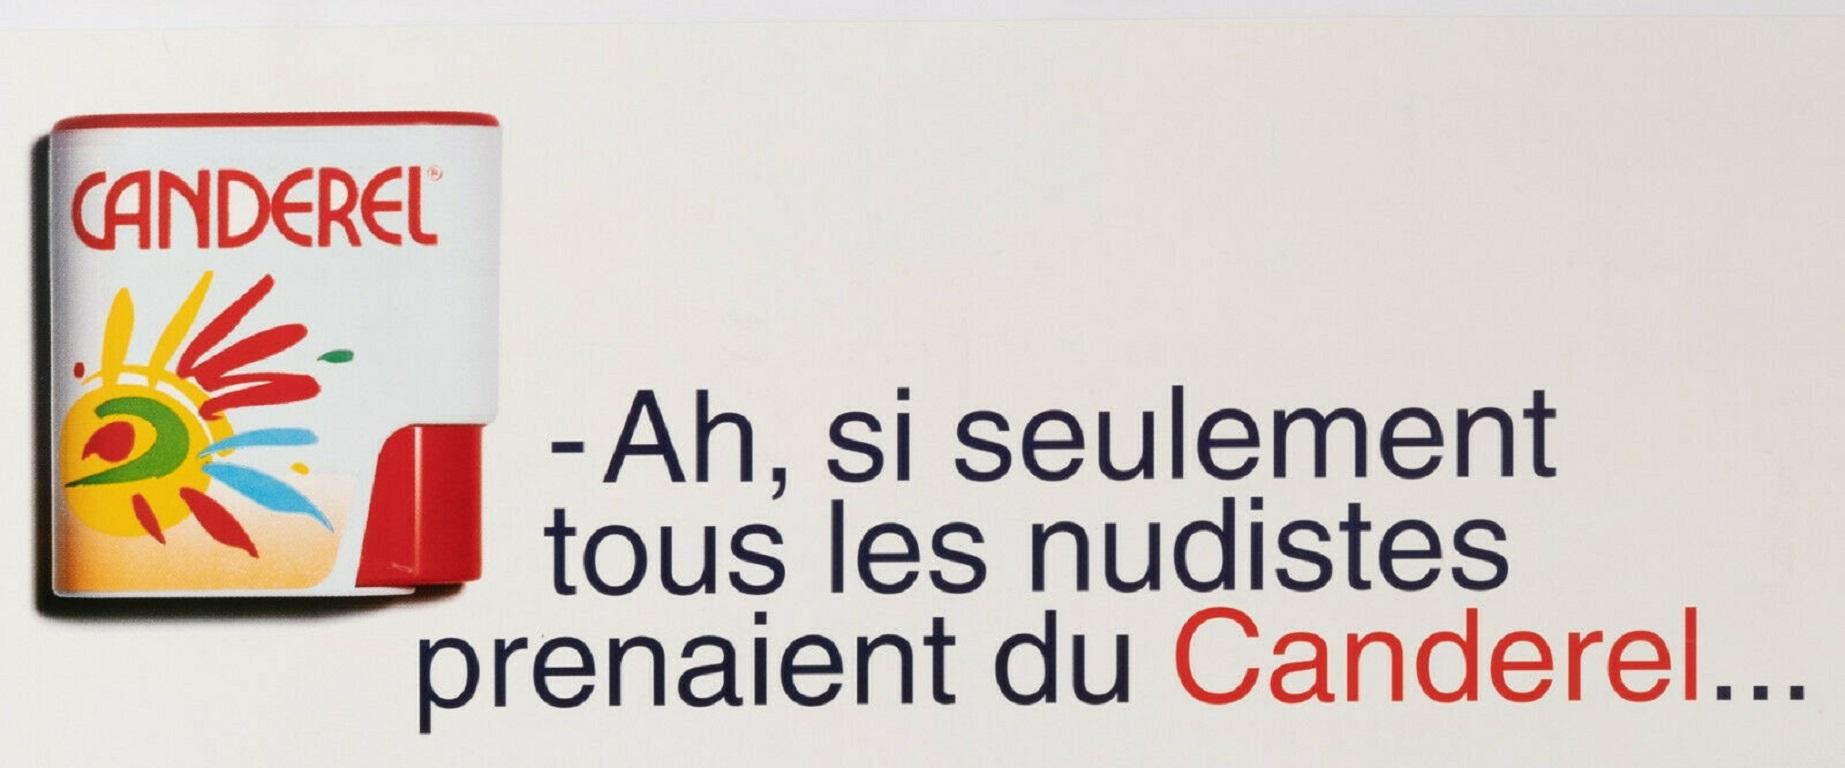 Original Poster-Edmond Kiraz-Canderel -The Nudist-Parisiennes, 1995

Poster Advertising for the Canderel brand, we see a young woman Nudist on the beach, as well as the phrase 